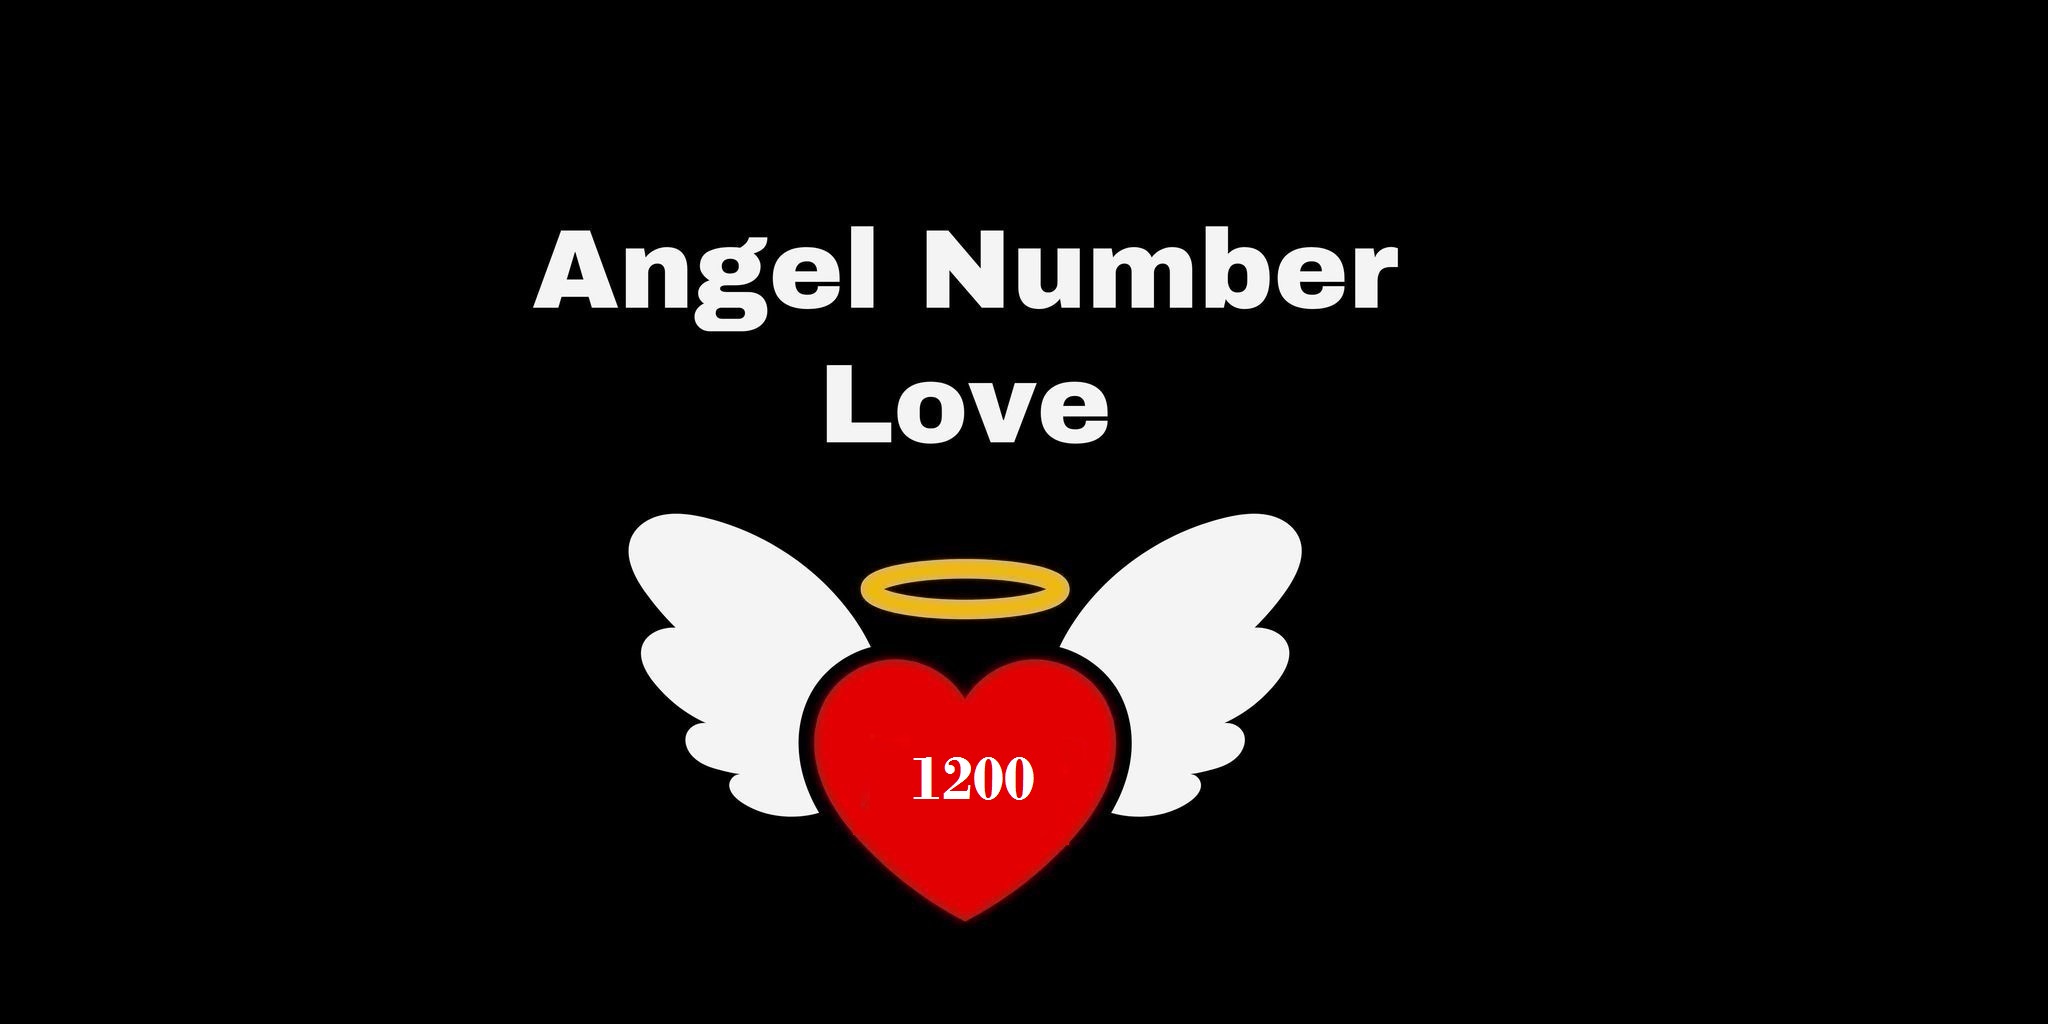 1200 Angel Number Meaning In Love